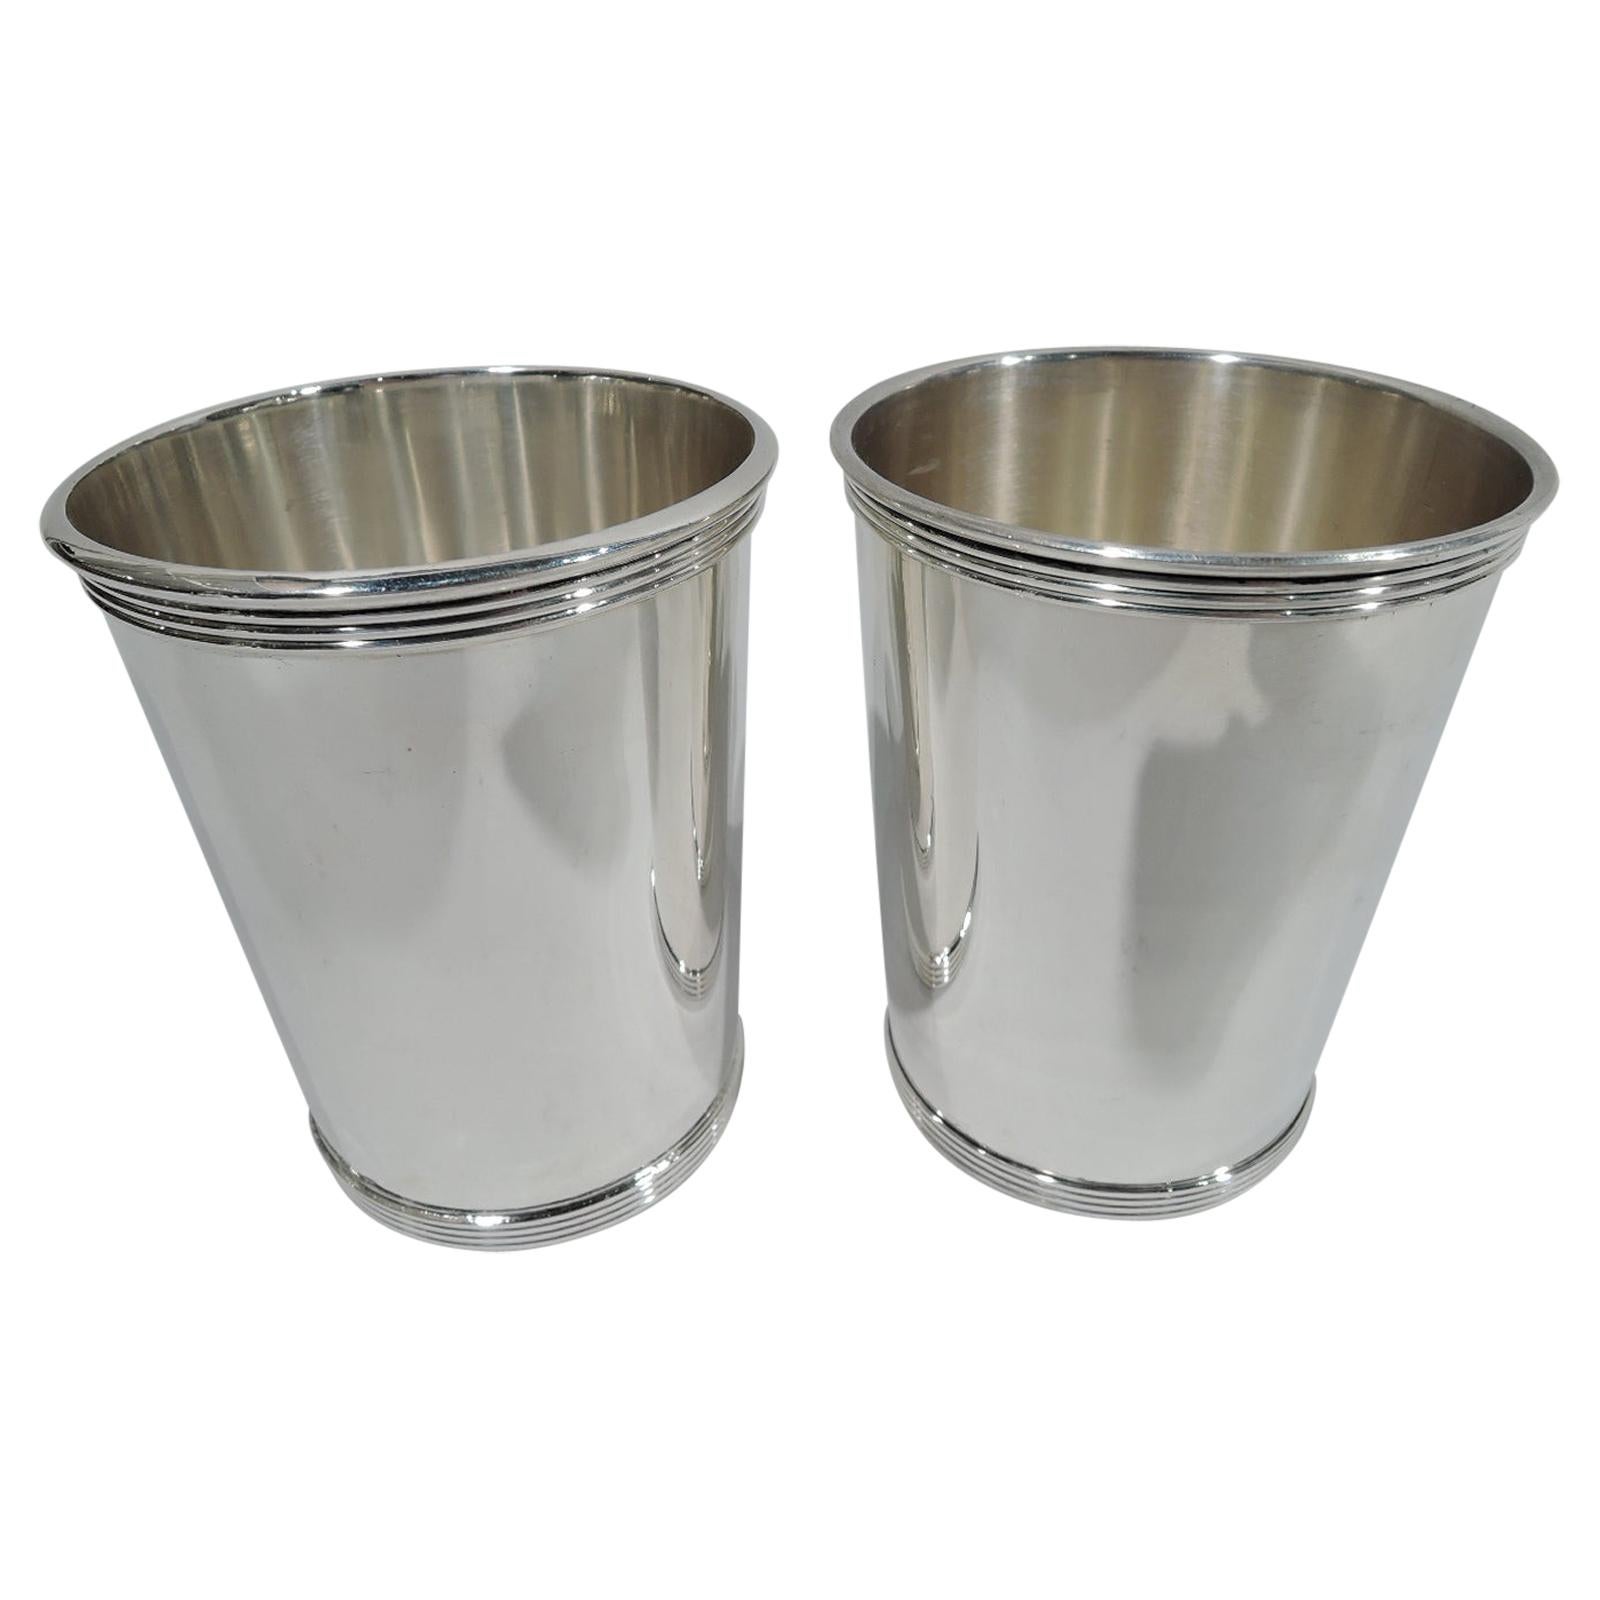 Pair of Kentucky Derby Day Sterling Silver Mint Juleps